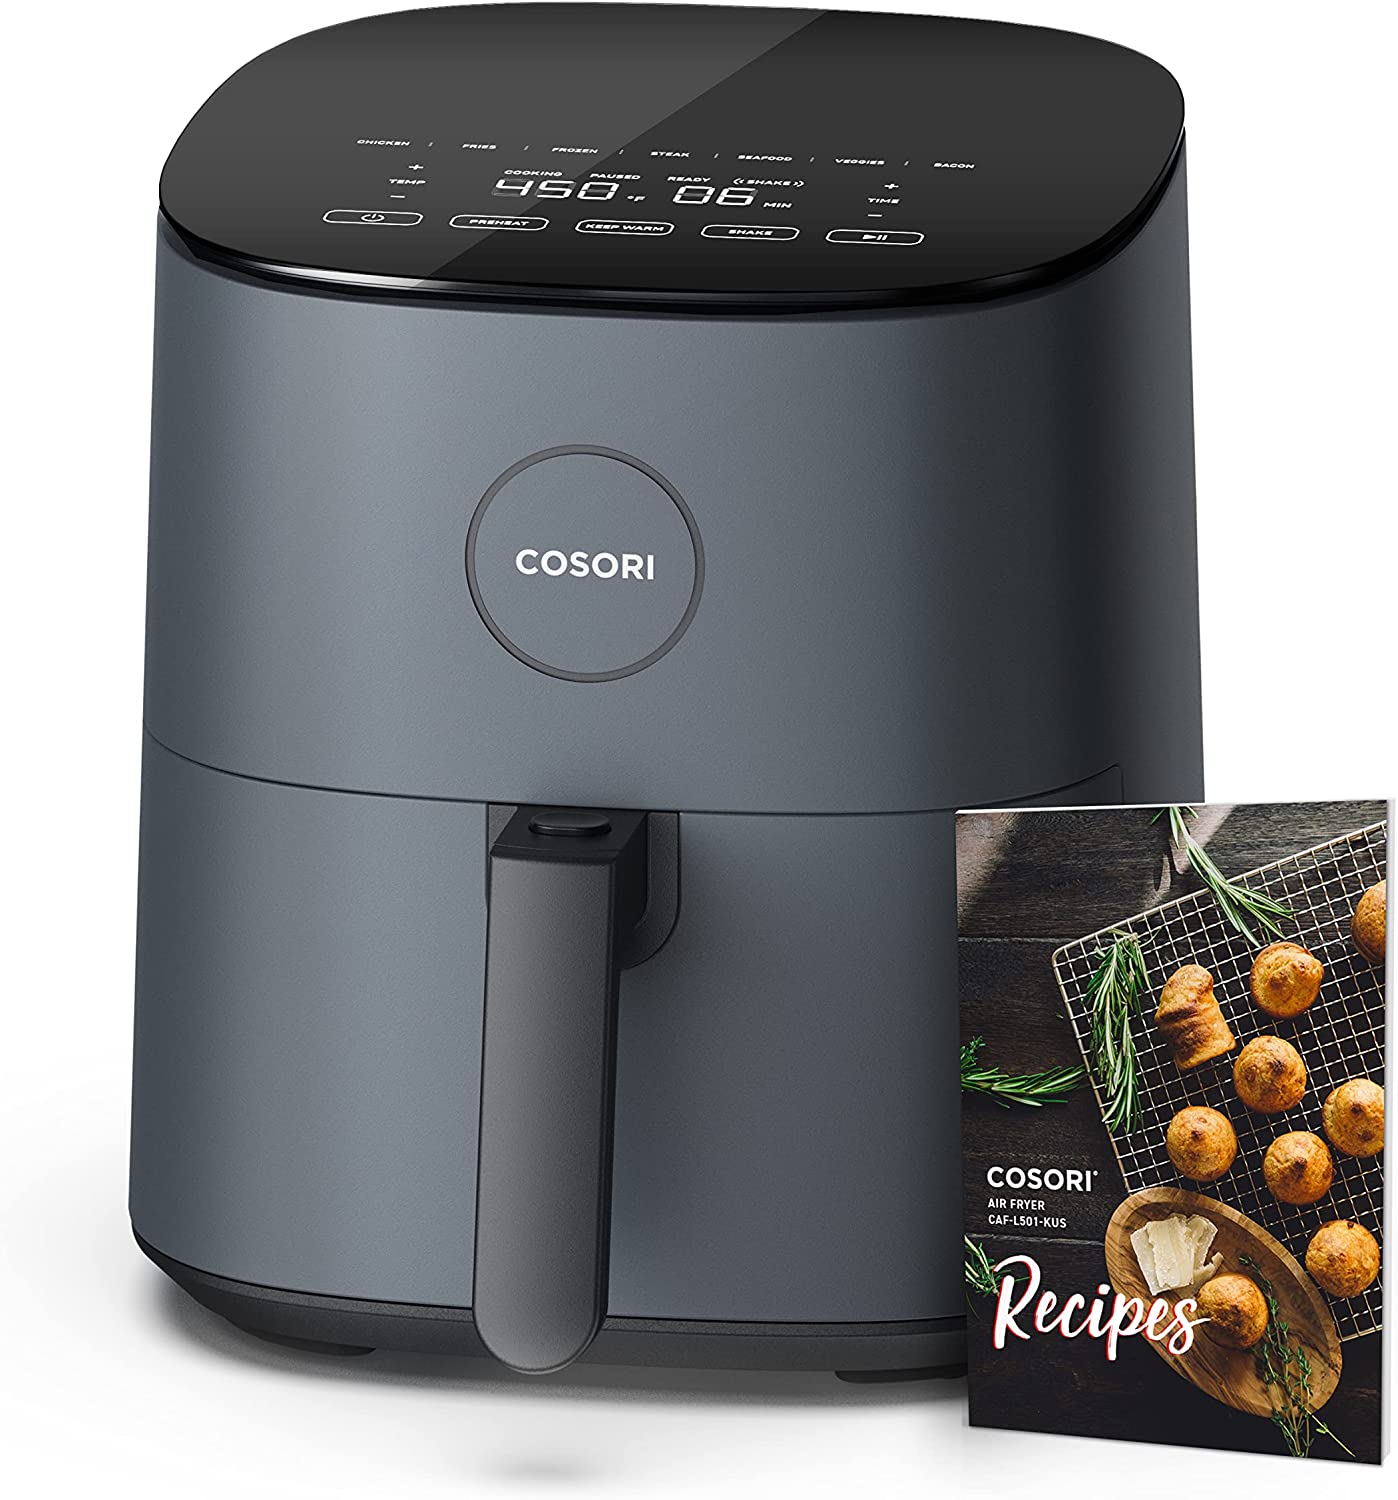 COSORI Air Fryer 5 QT 9-in-1 Airfryer Compact Oilless Small Oven $84.99